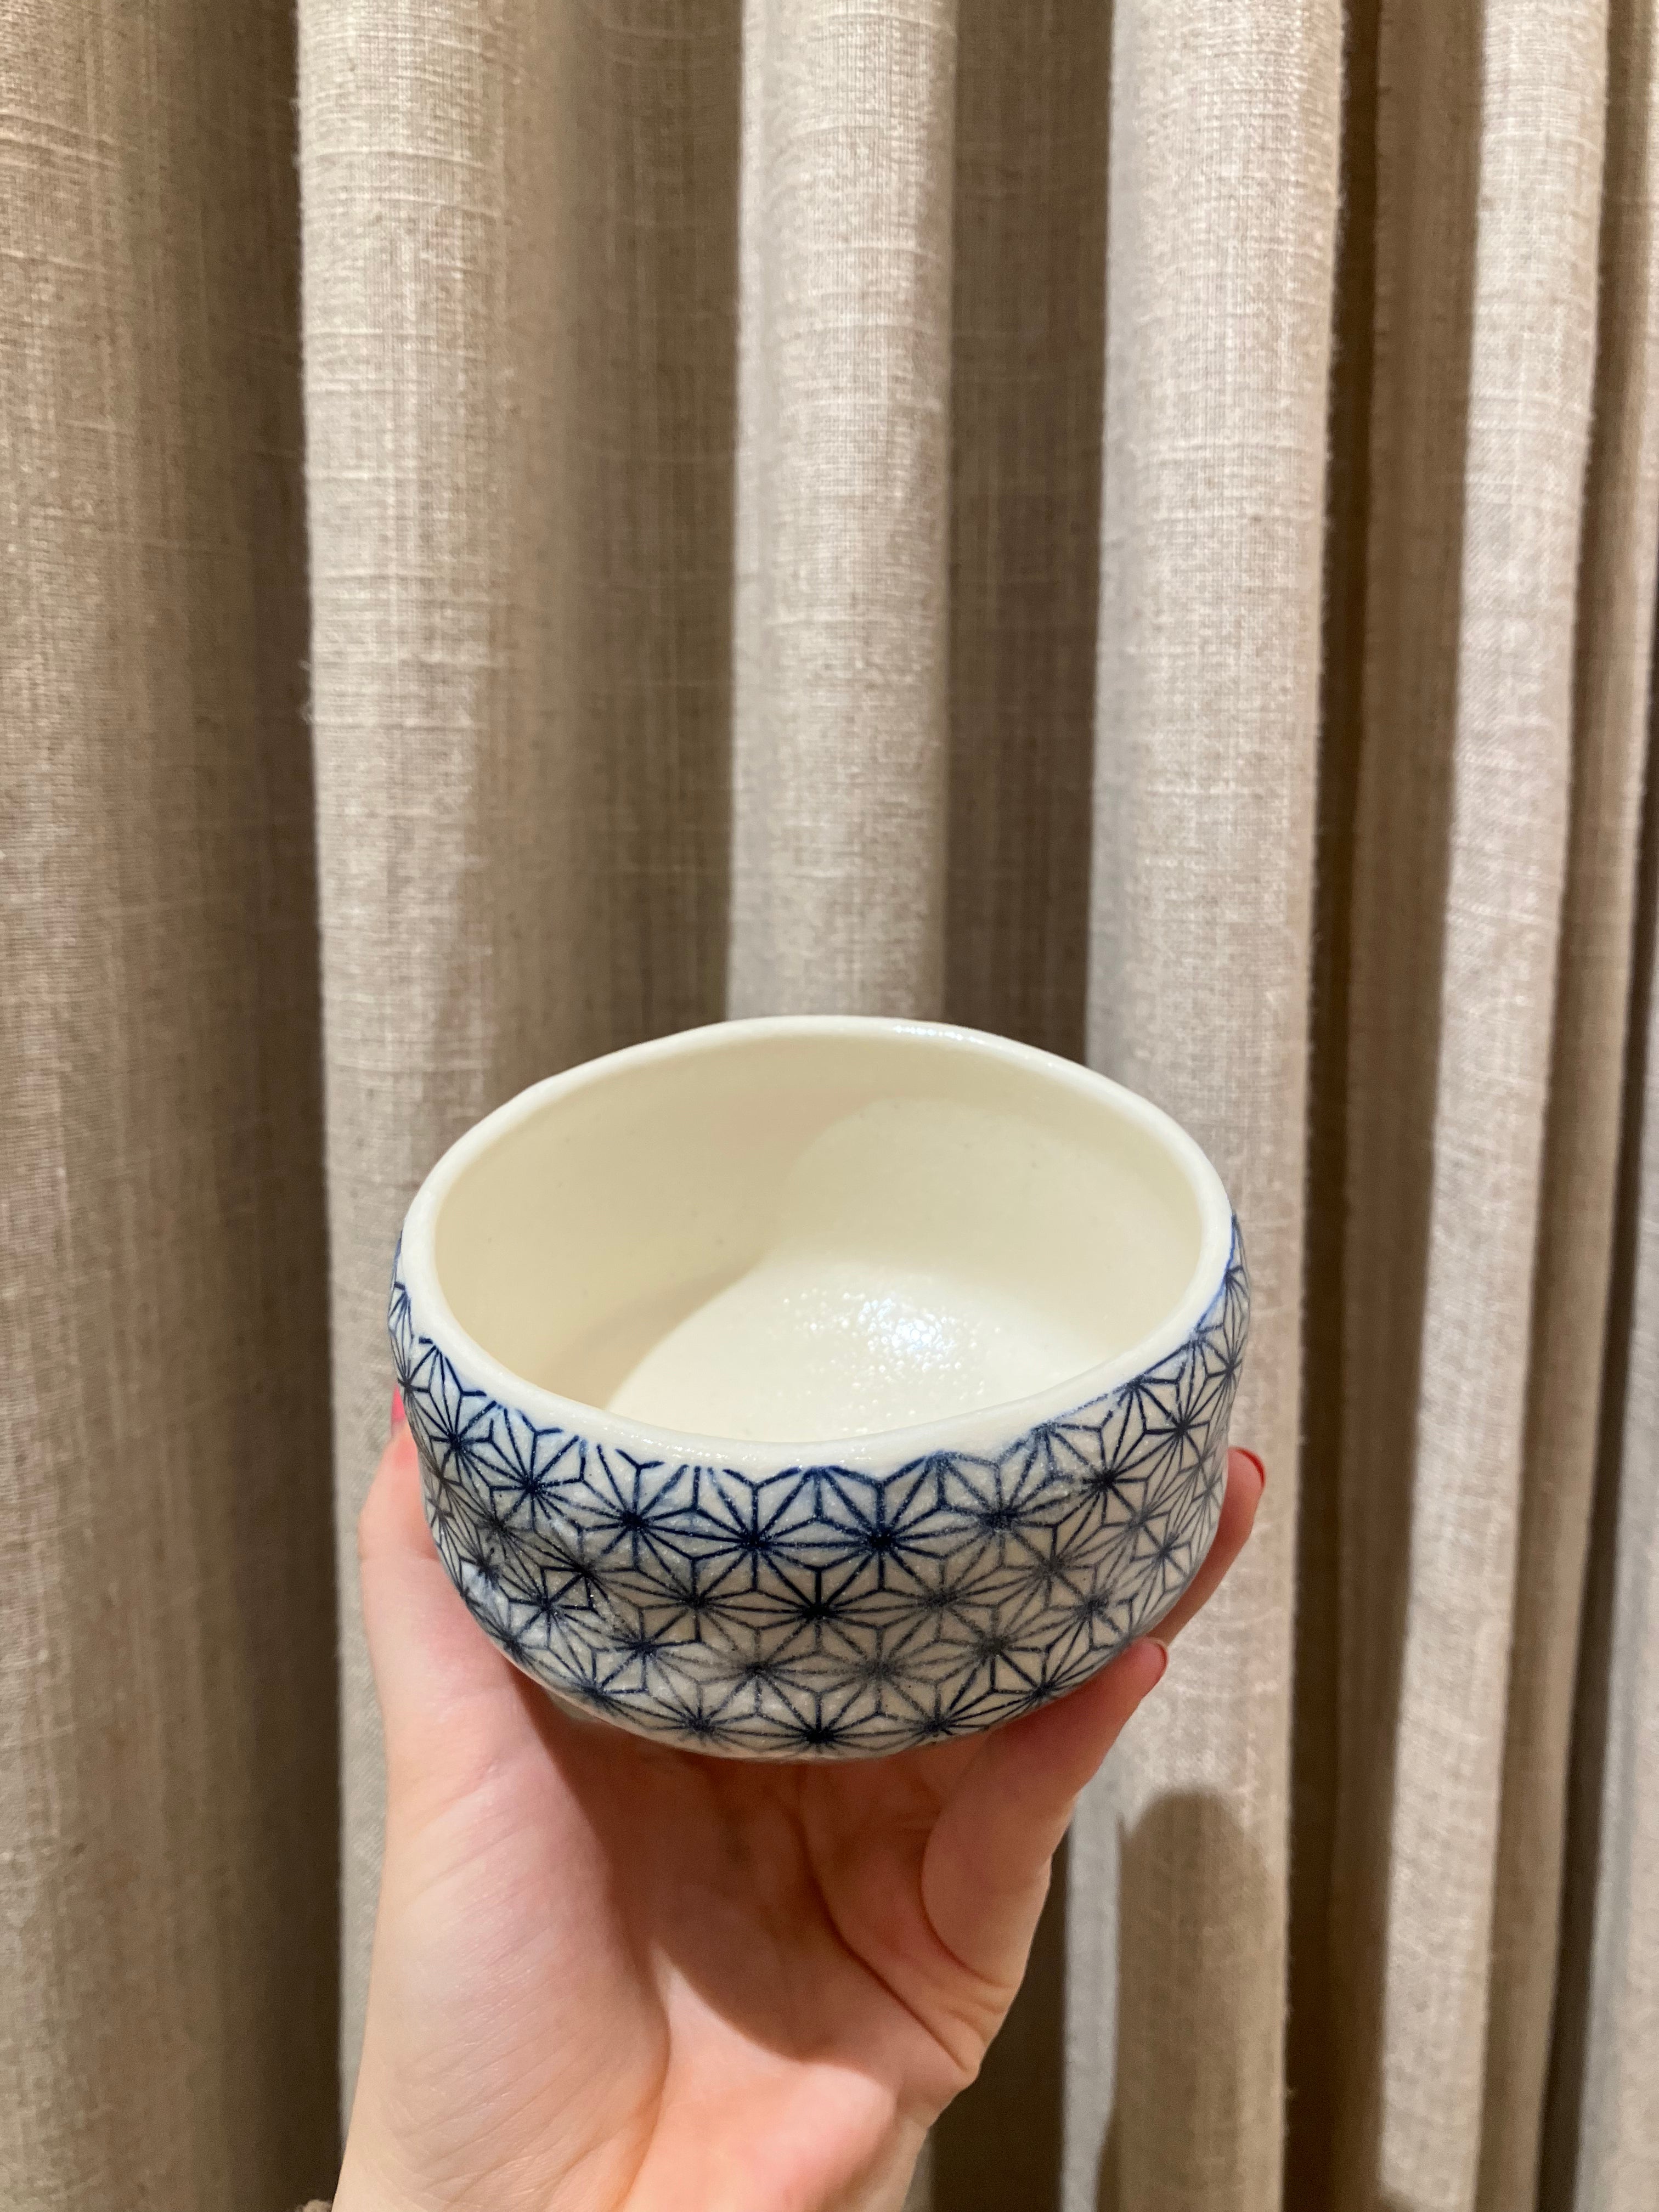 Small matcha cup with Japanese star pattern